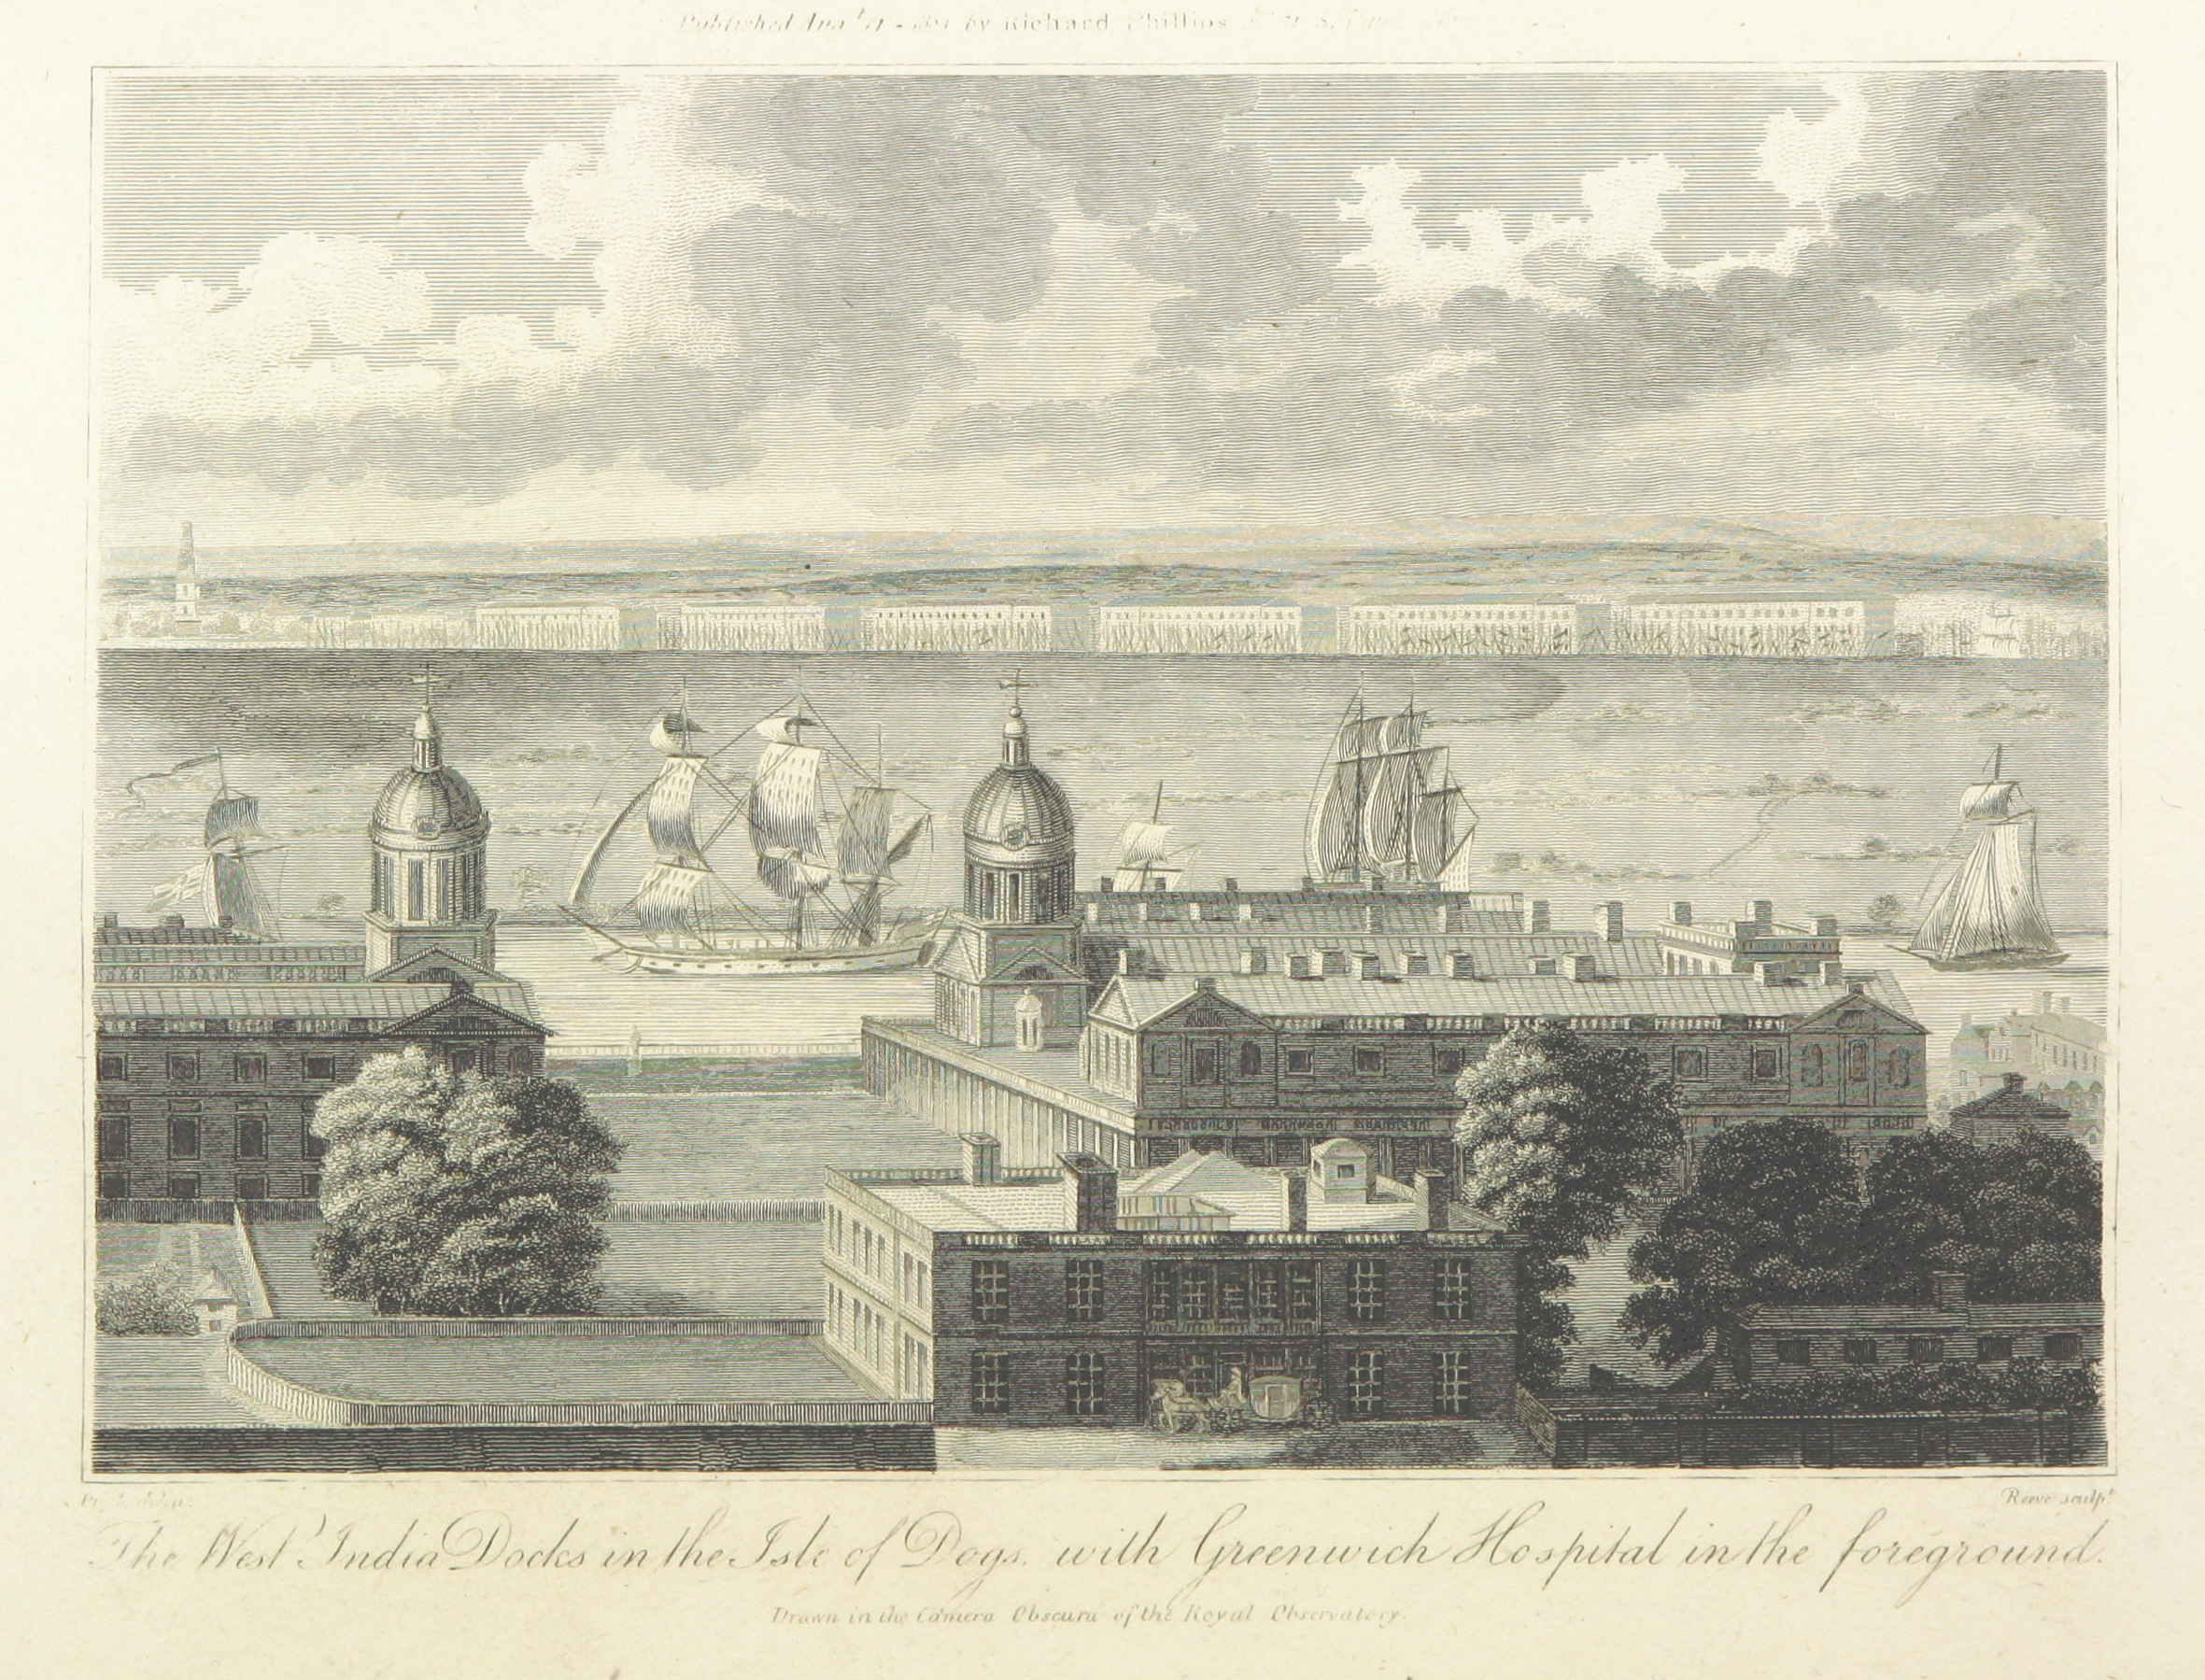 Phillips(1804)_p176_-_The_West_India_Docks_in_the_Isle_of_Dogs_with_Greenwich_Hospital_in_the_foreground